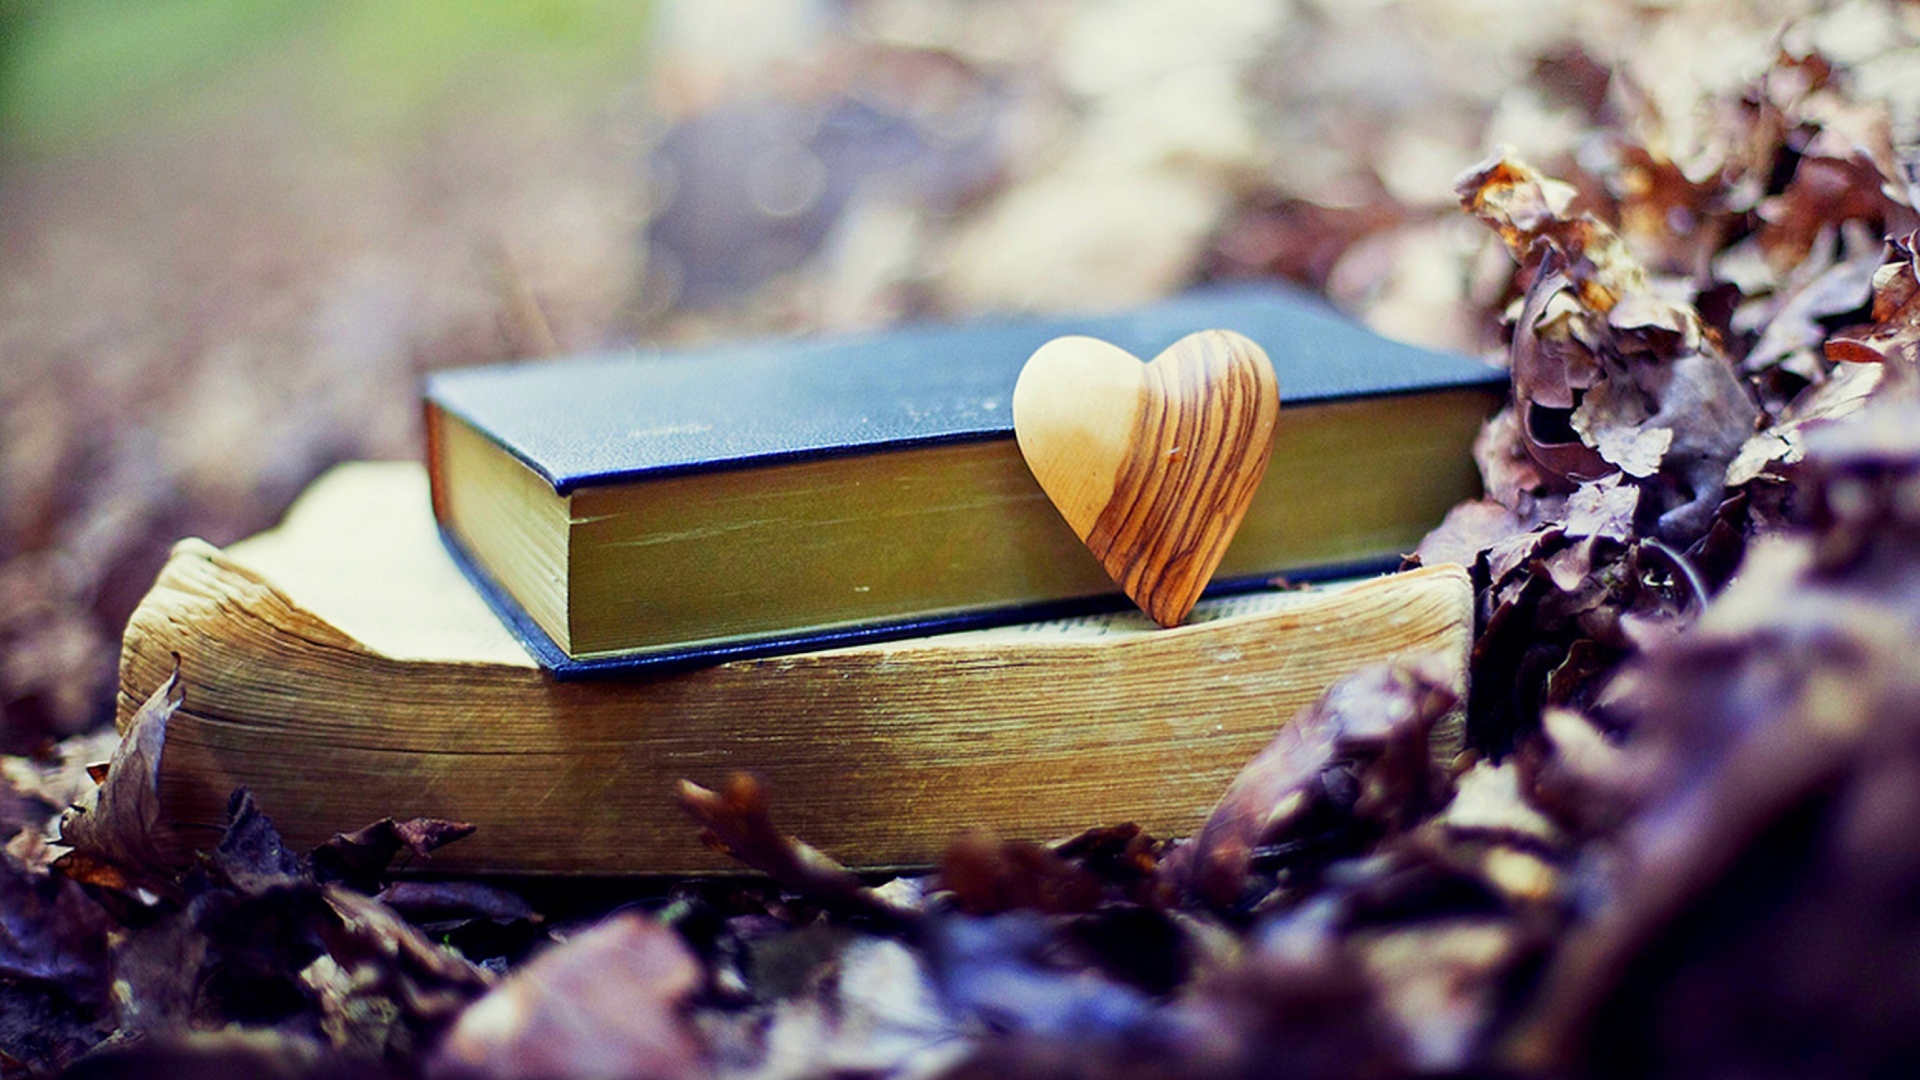 Yellow Heart And Vintage Books wallpaper 1920x1080